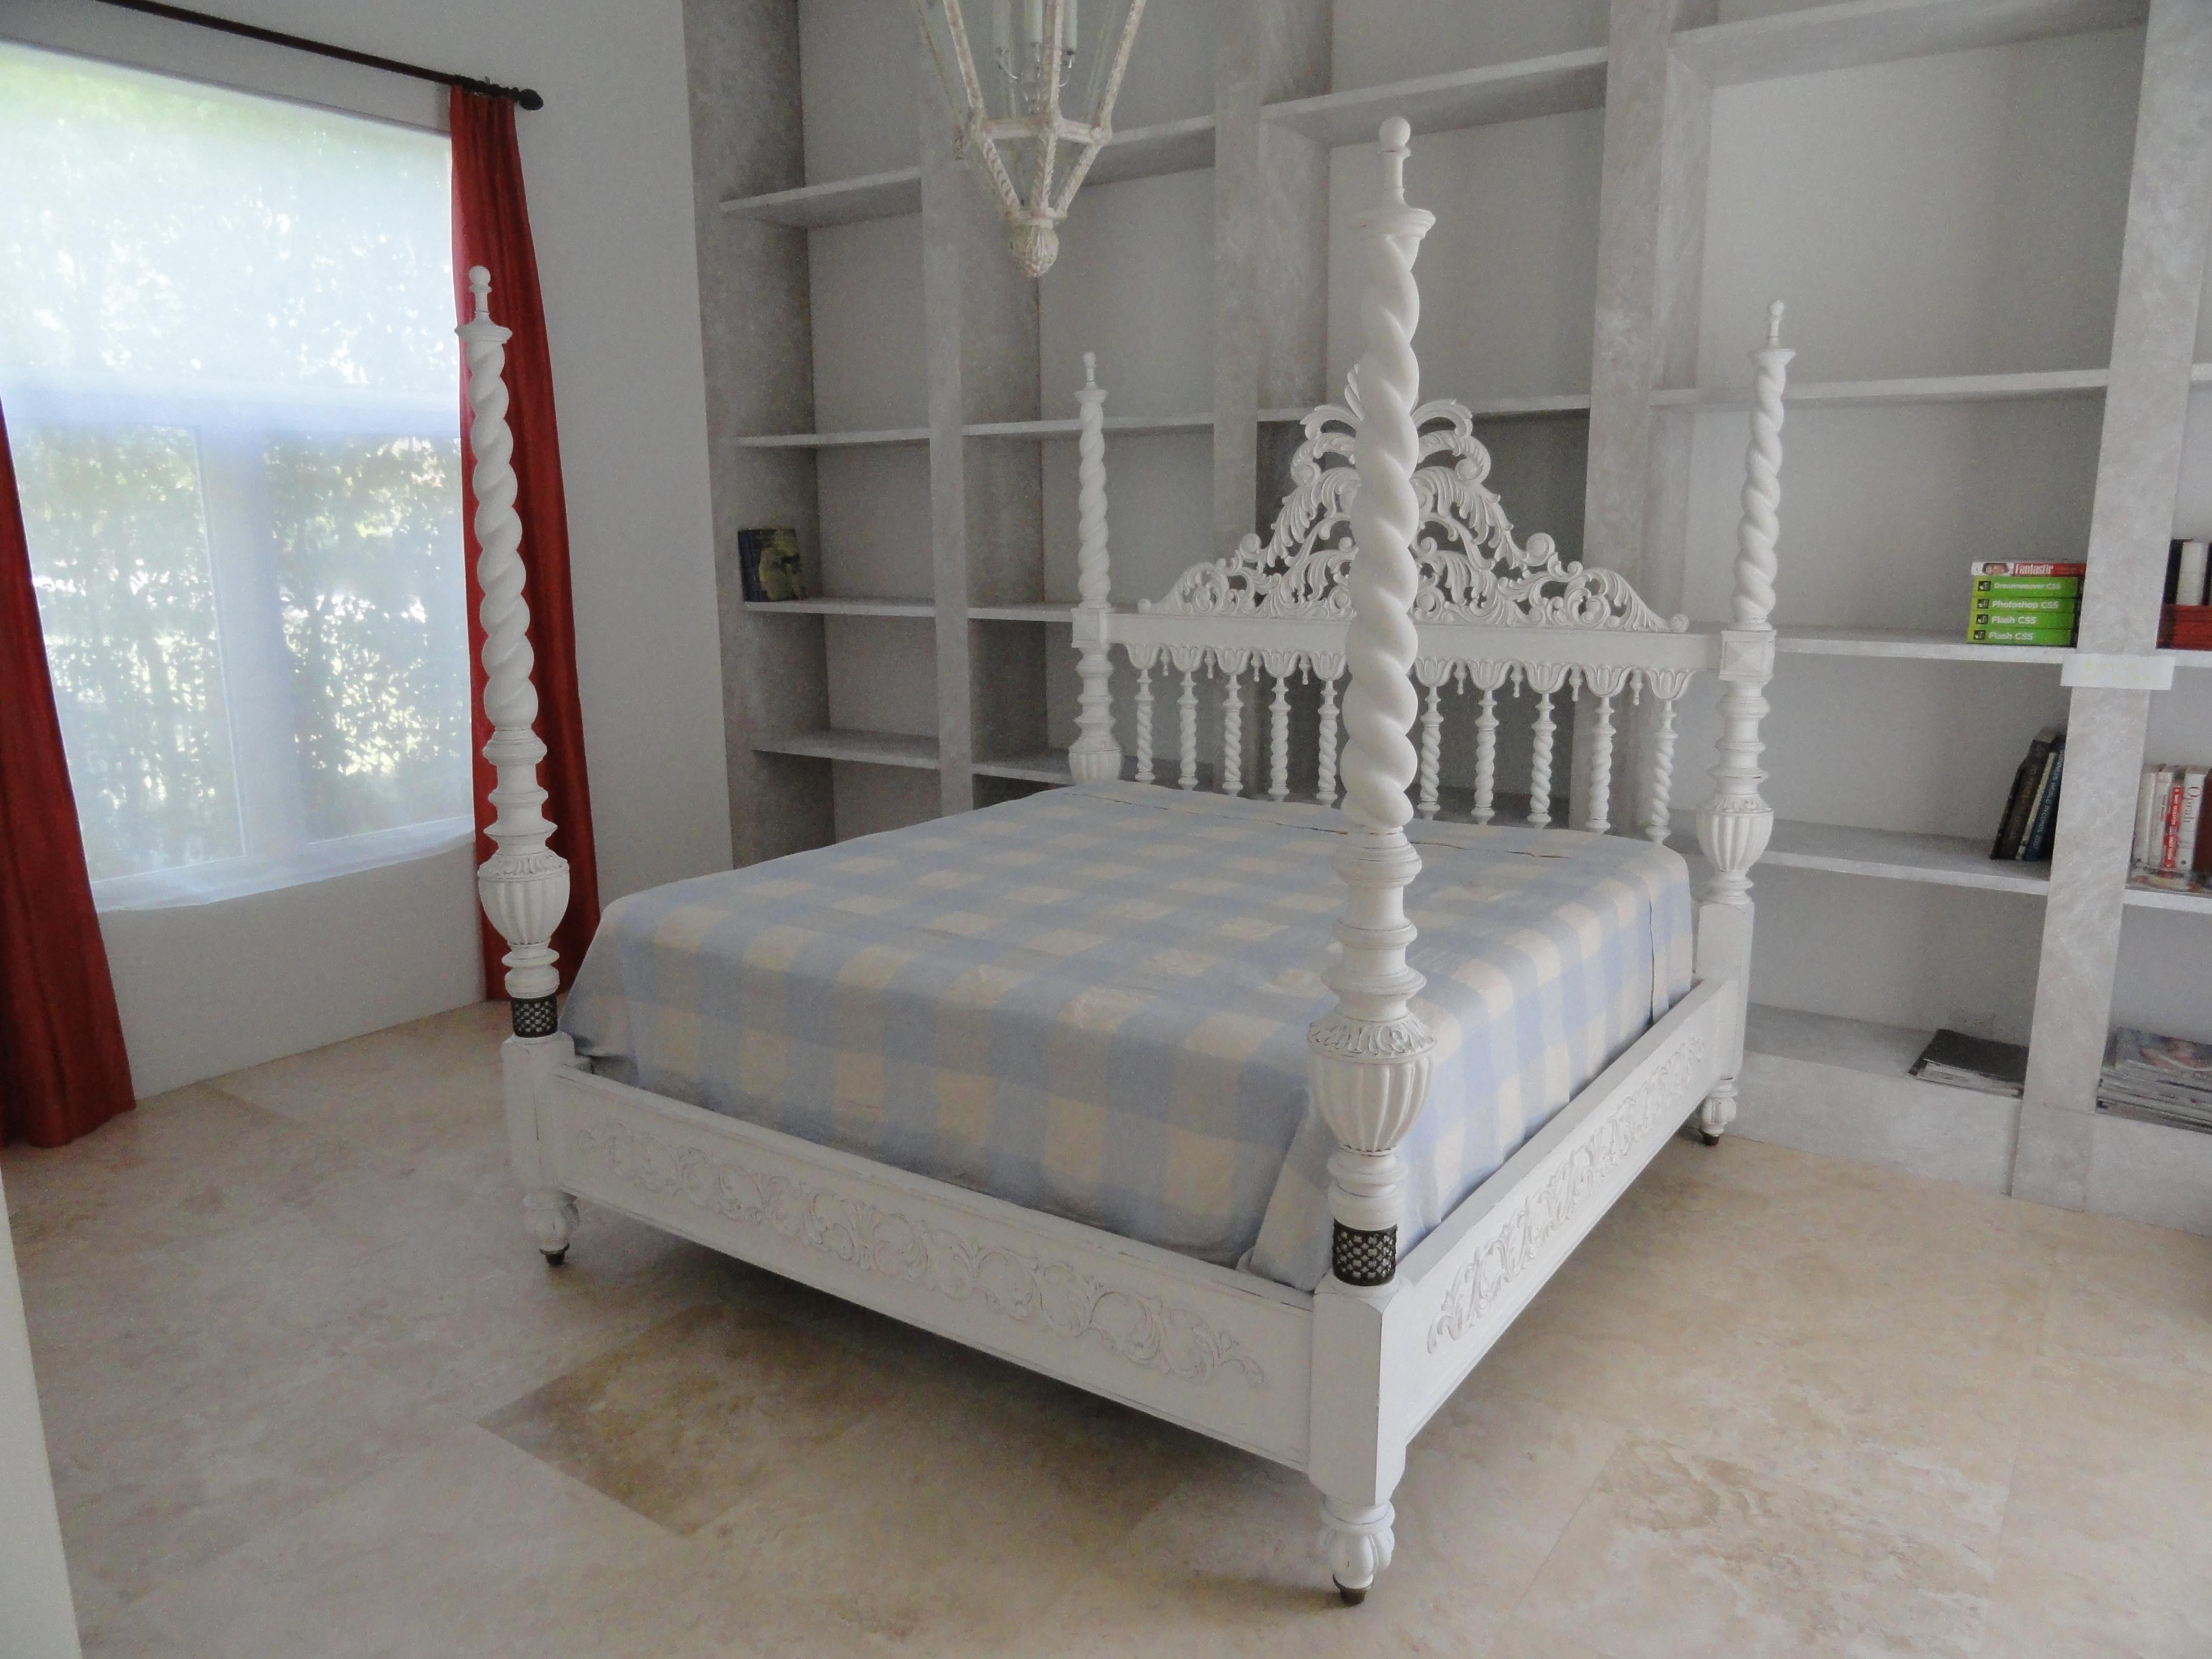 King size plantation style four-poster bed. Head board features twist columns with an elegant carved cartouche. Four posters are carved wood in a twist pattern. Beautiful detail on base of bed. Custom white painted finish. Bed frame only. Does not